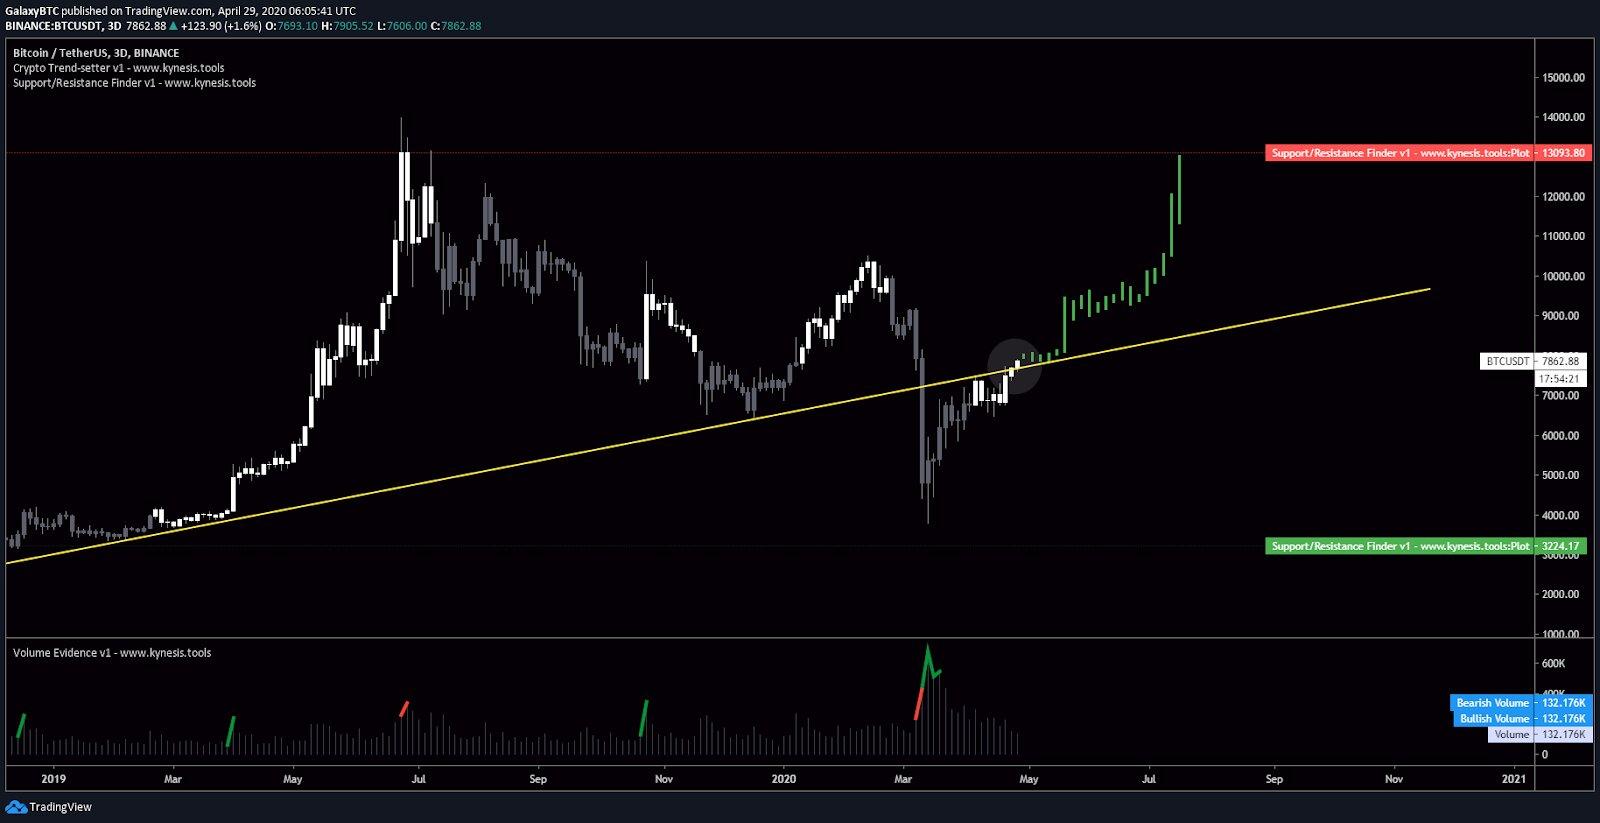 Bitcoin fractal if it does not correct after the halving. Source: Galaxy